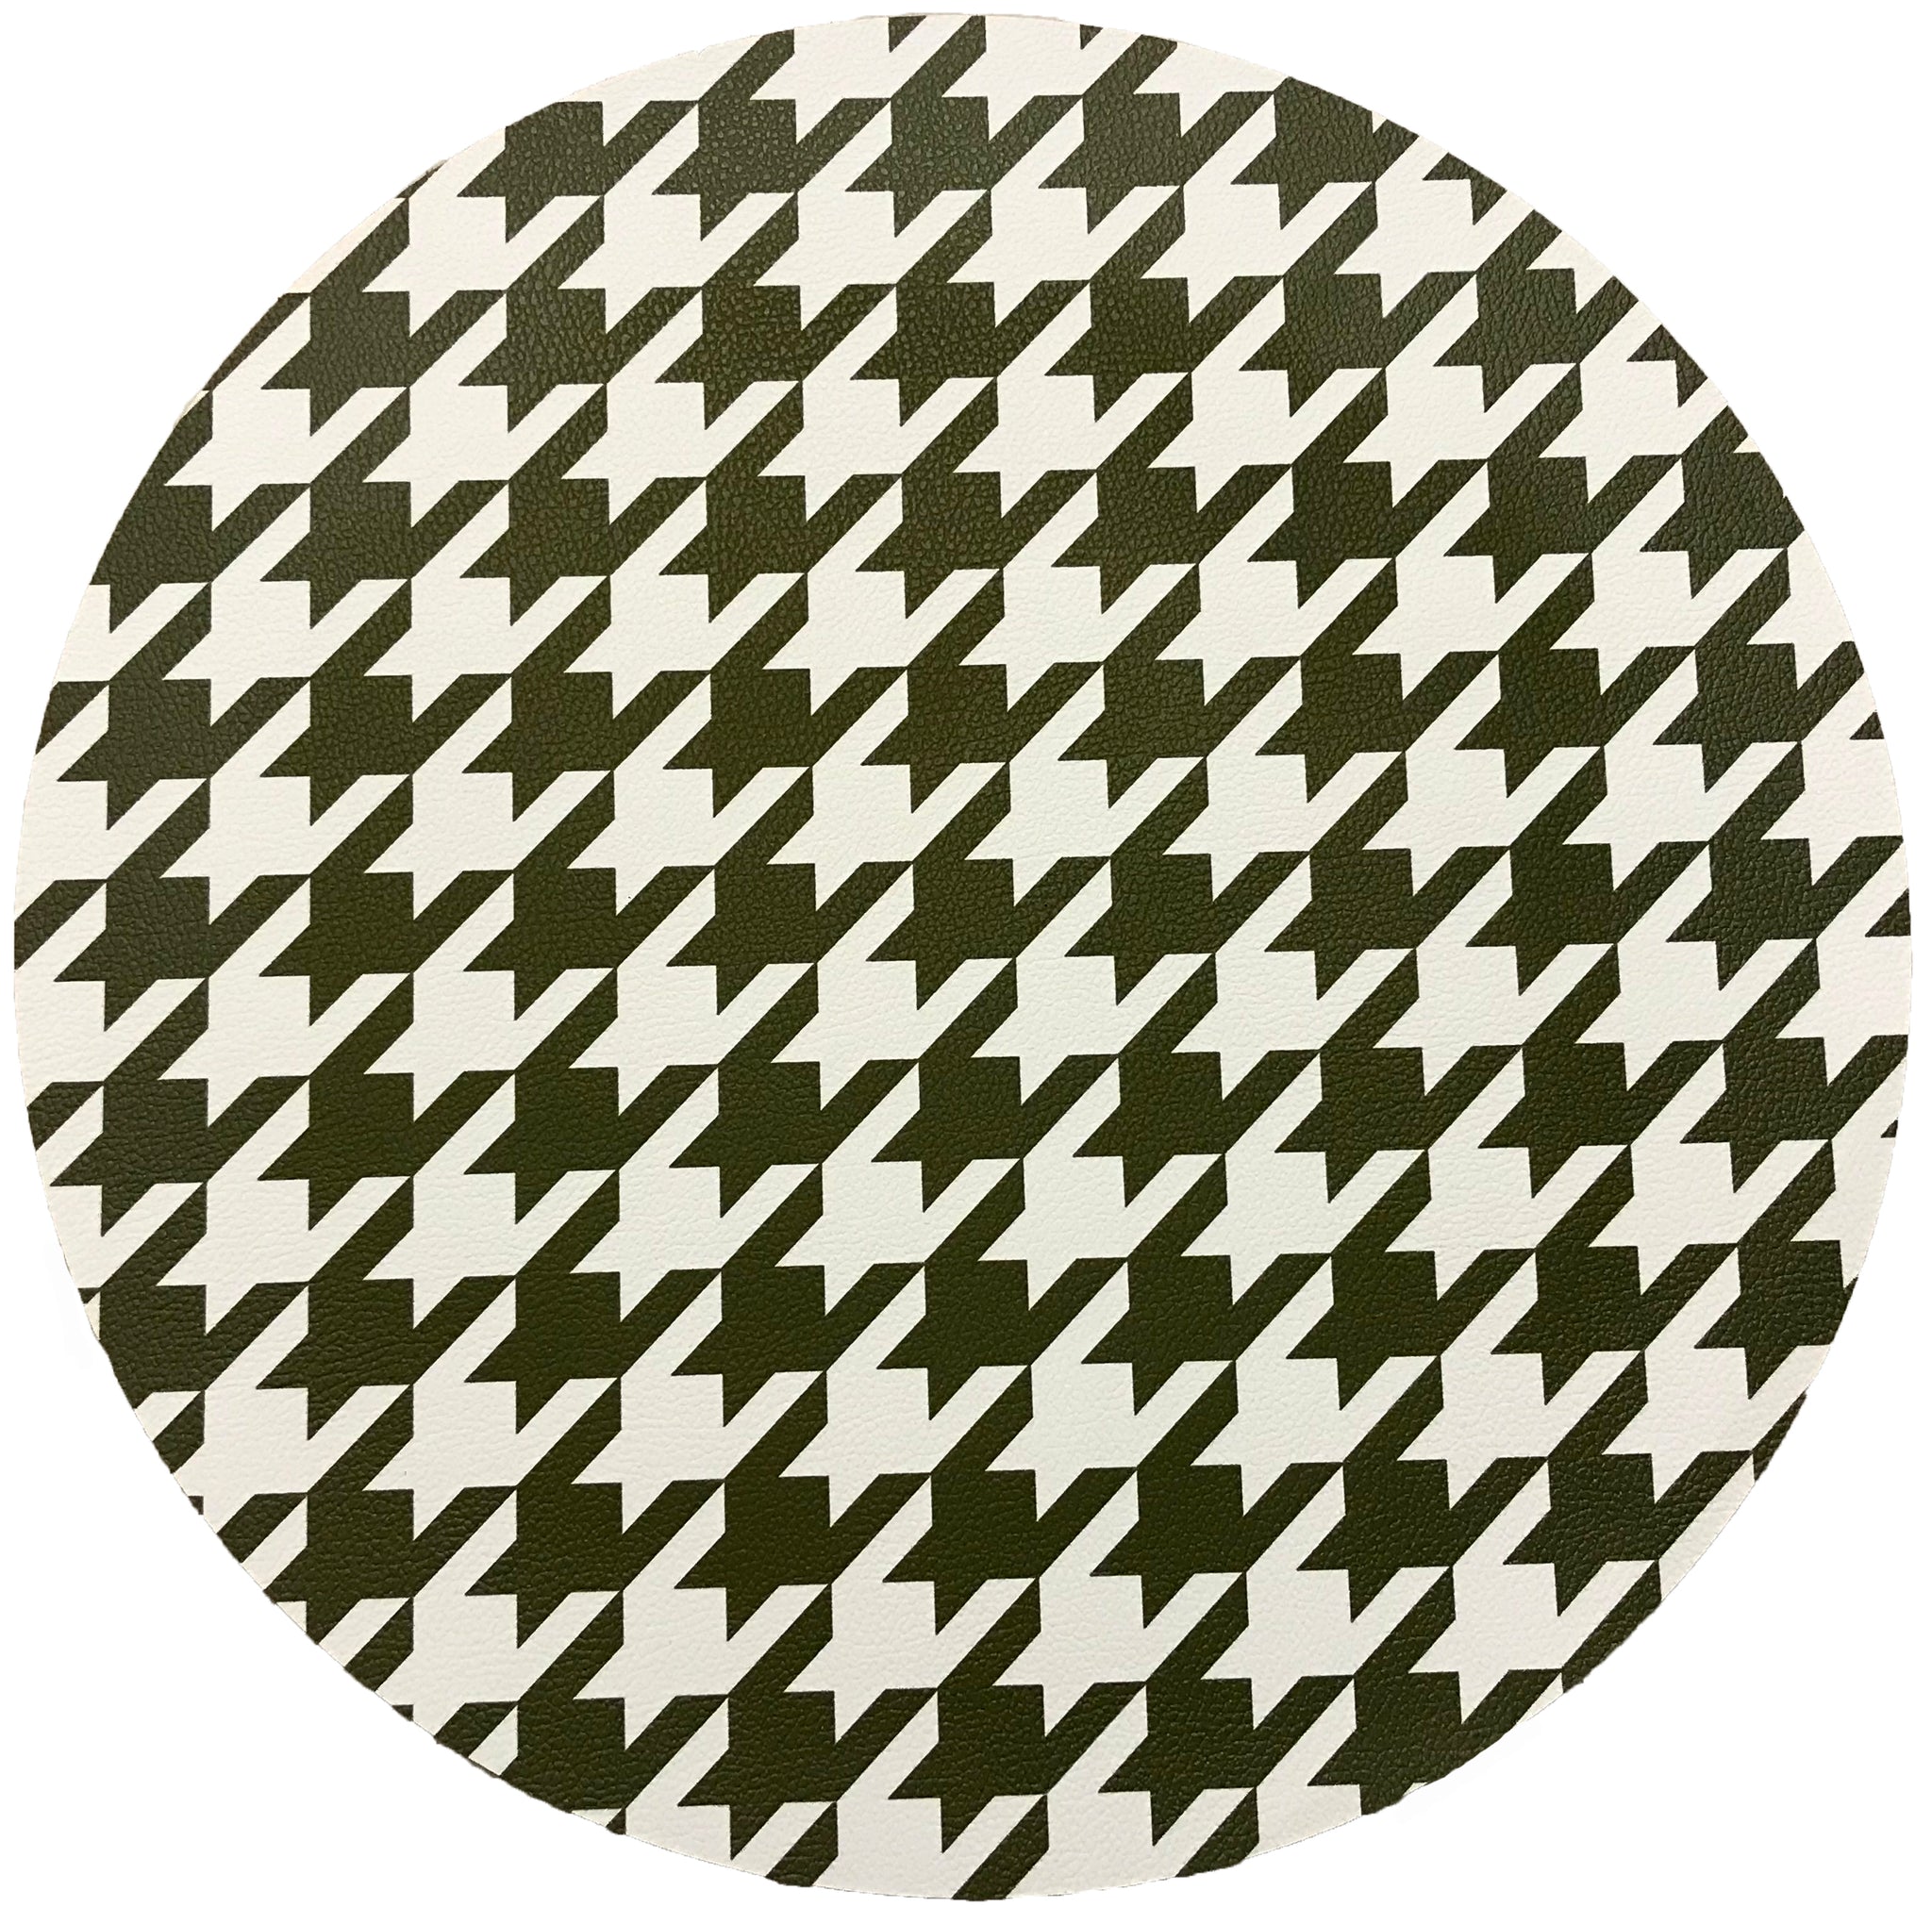 HOUNDSTOOTH GREEN WHITE 16" ROUND PEBBLE PLACEMAT, SET OF 4 - nicolettemayer.com